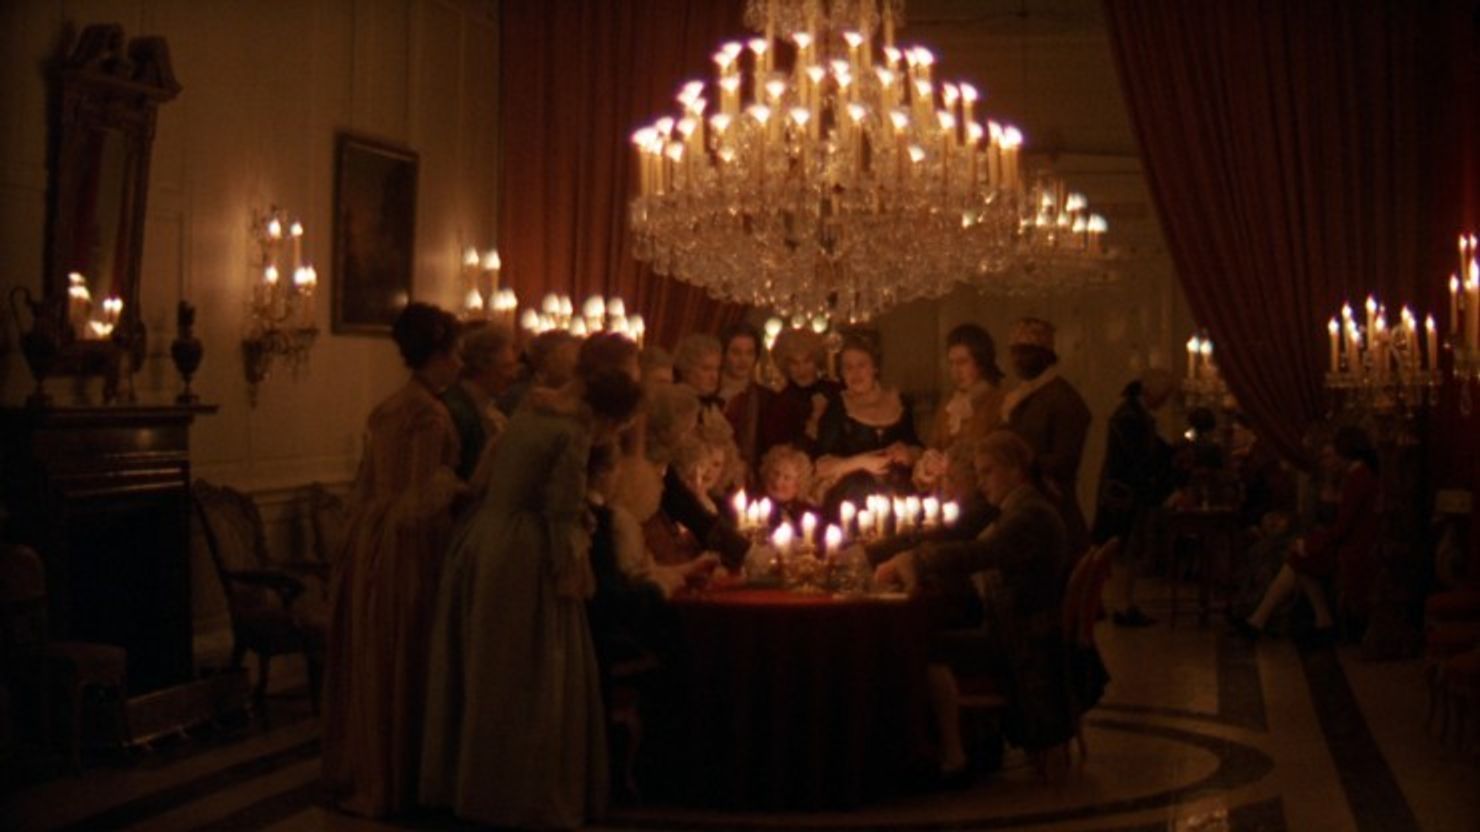 A room full of people surrounded by candle light, 'Barry Lyndon'